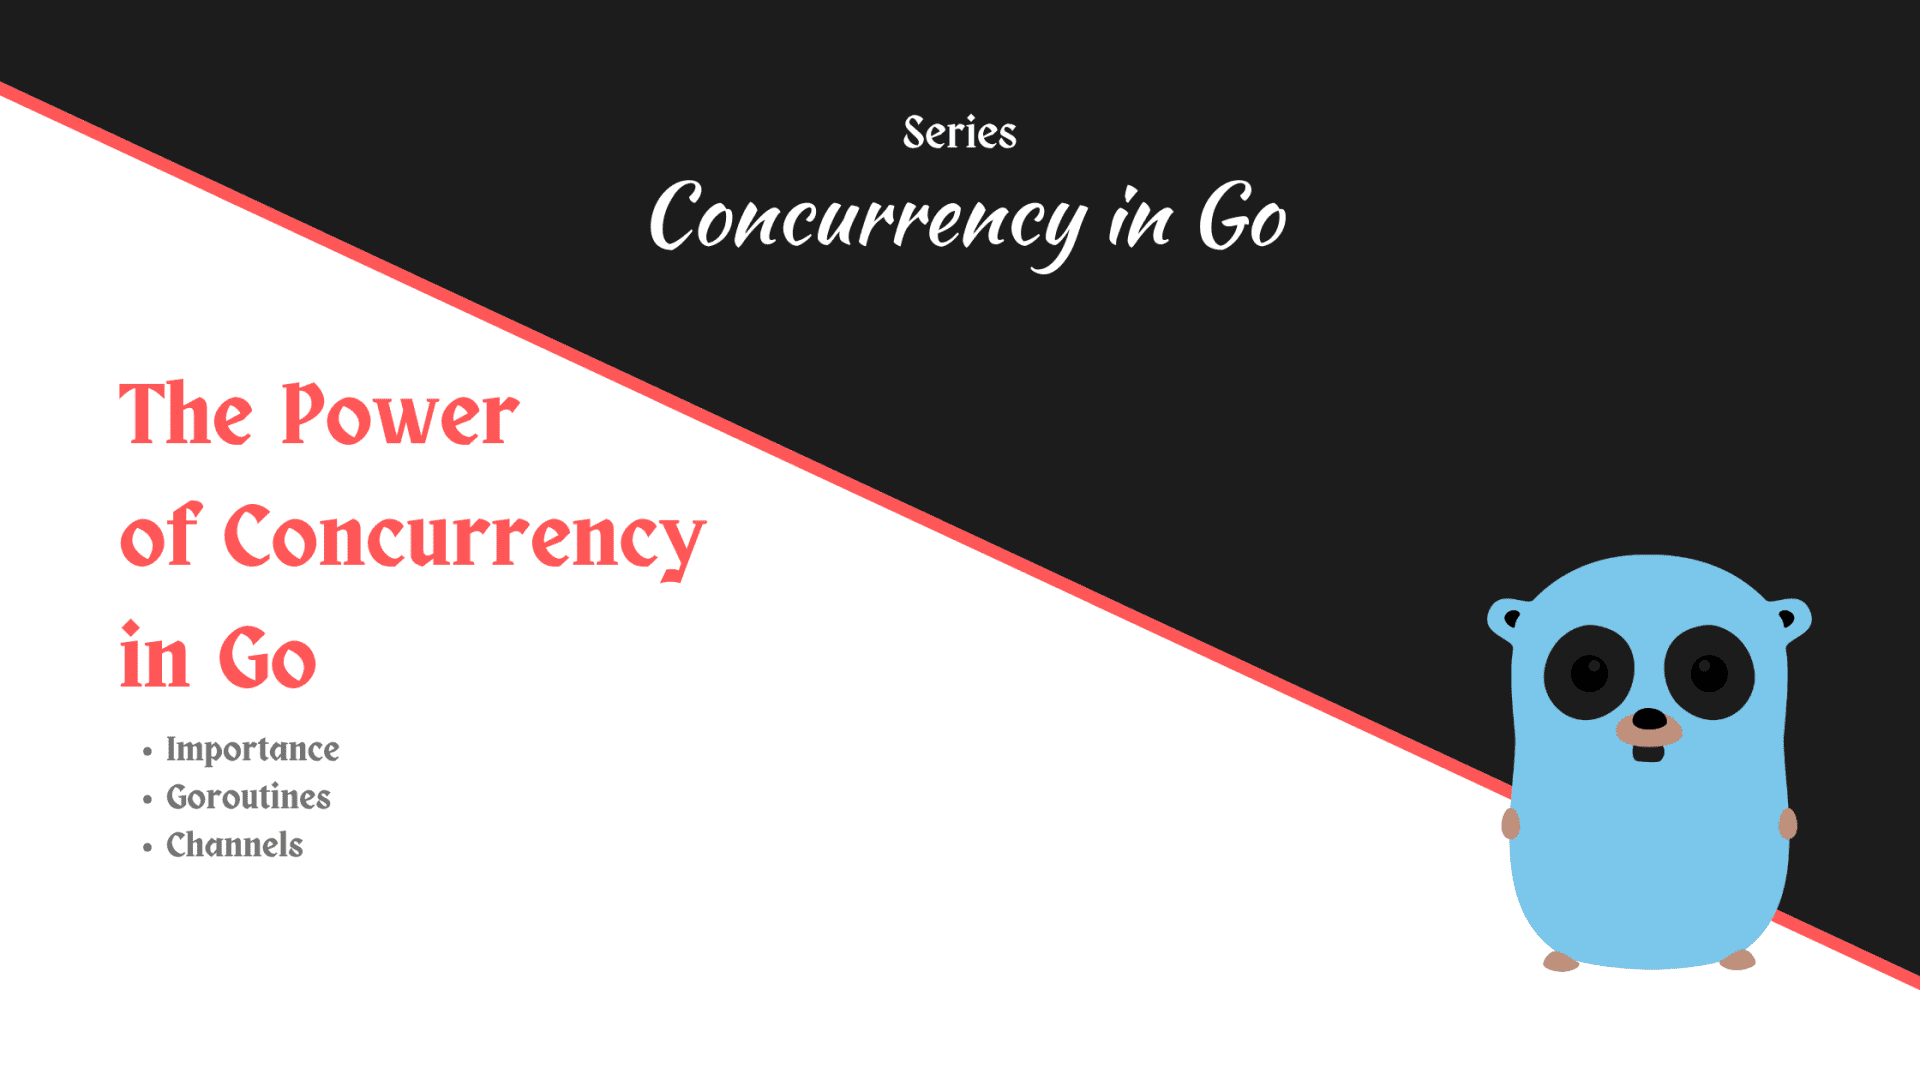 The Power of Concurrency in Go